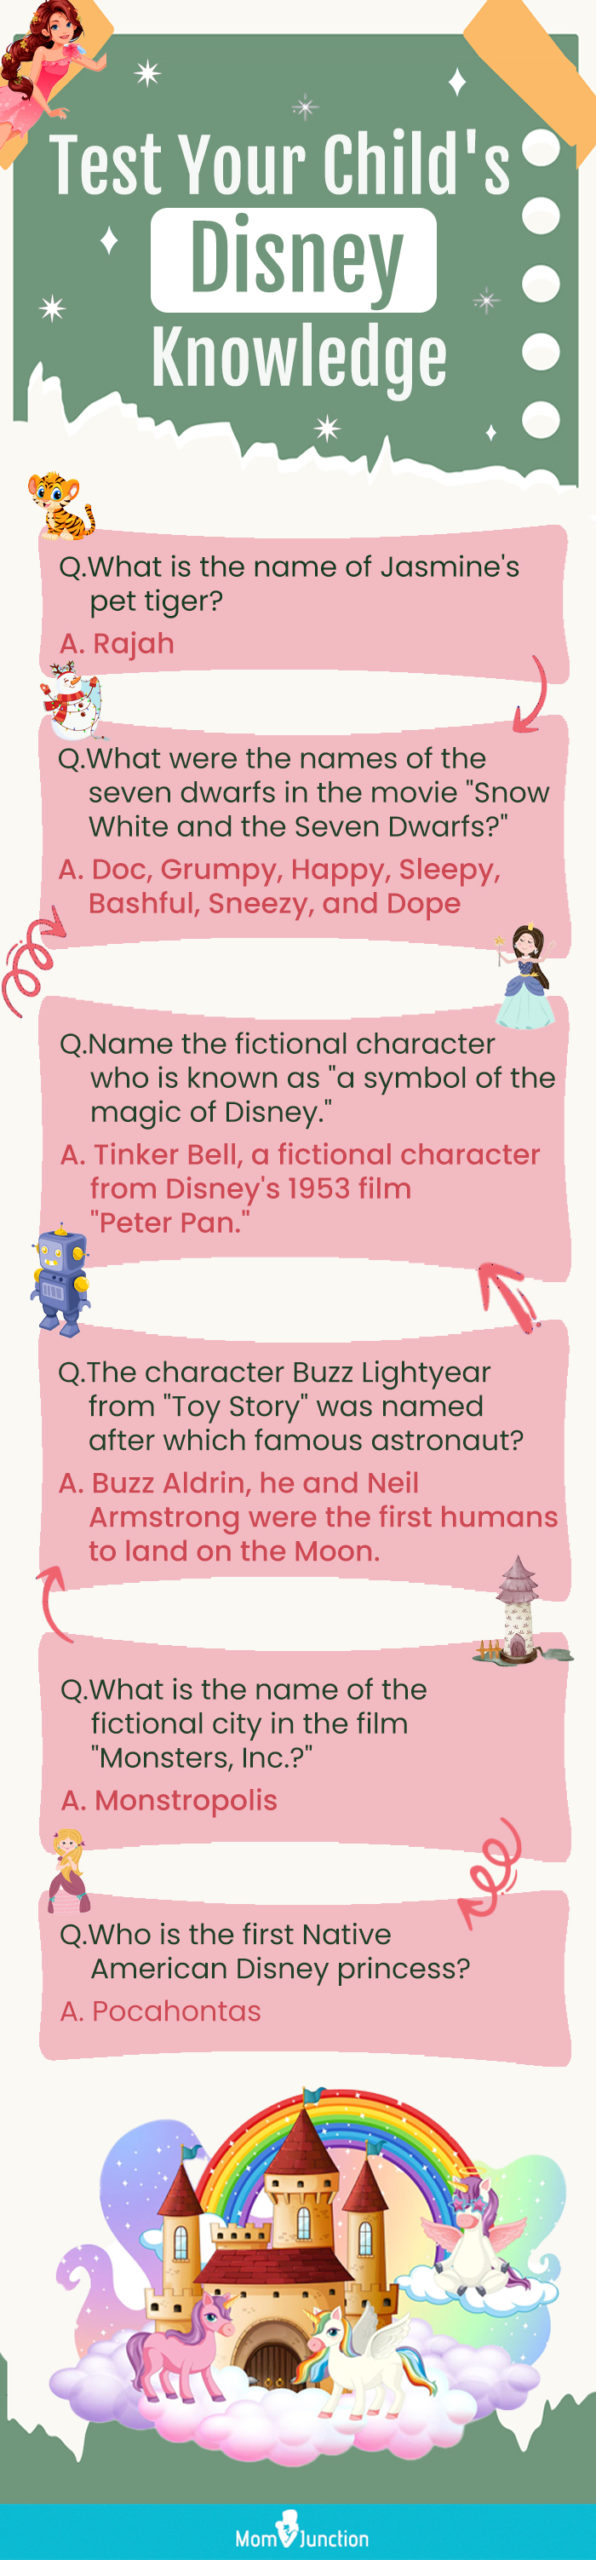 150 Disney Trivia Questions and Answers That Will Win Game Night